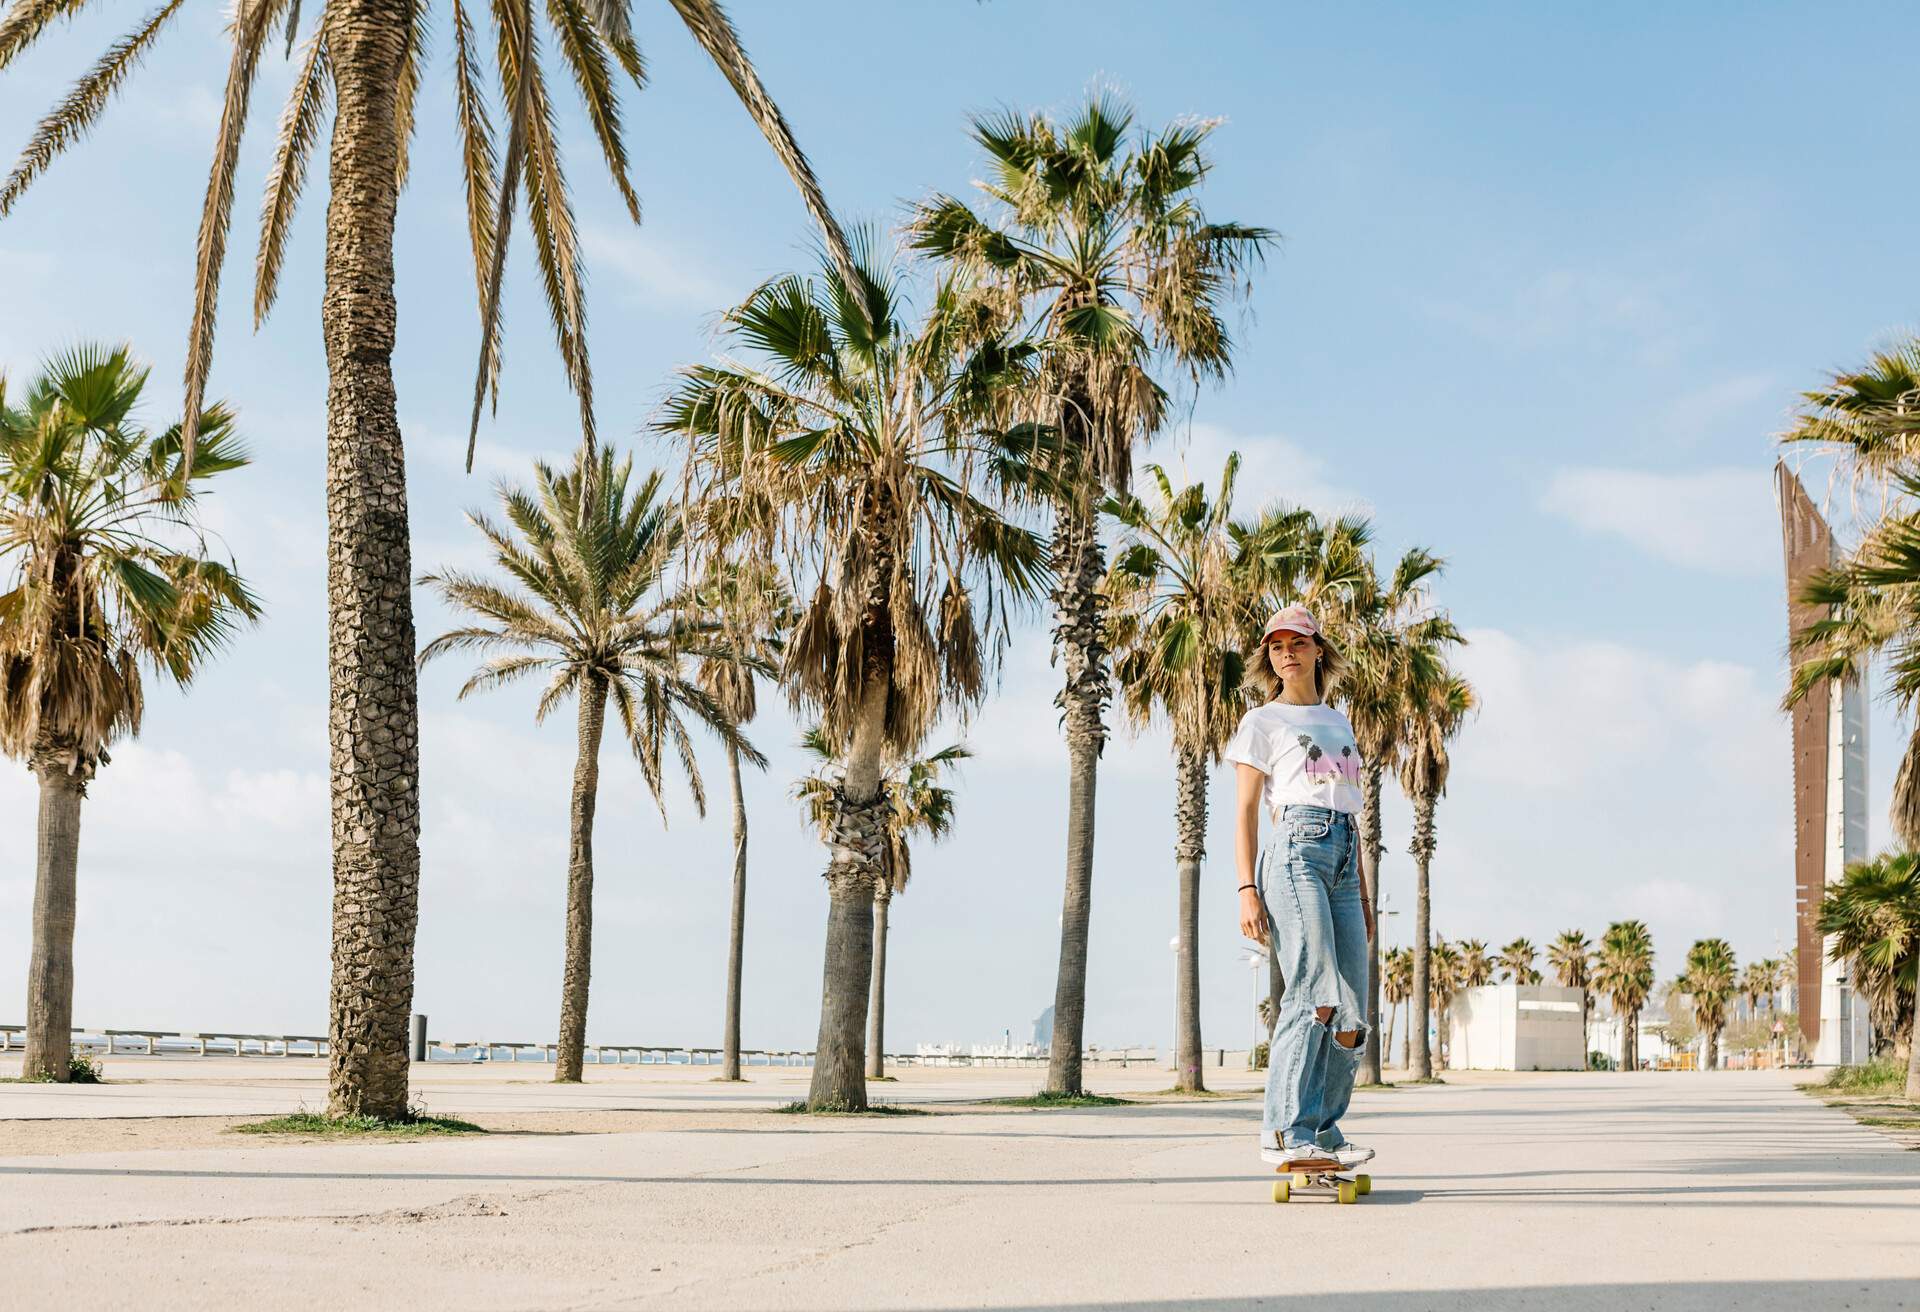 A person skateboarding on a street lined with palm trees.